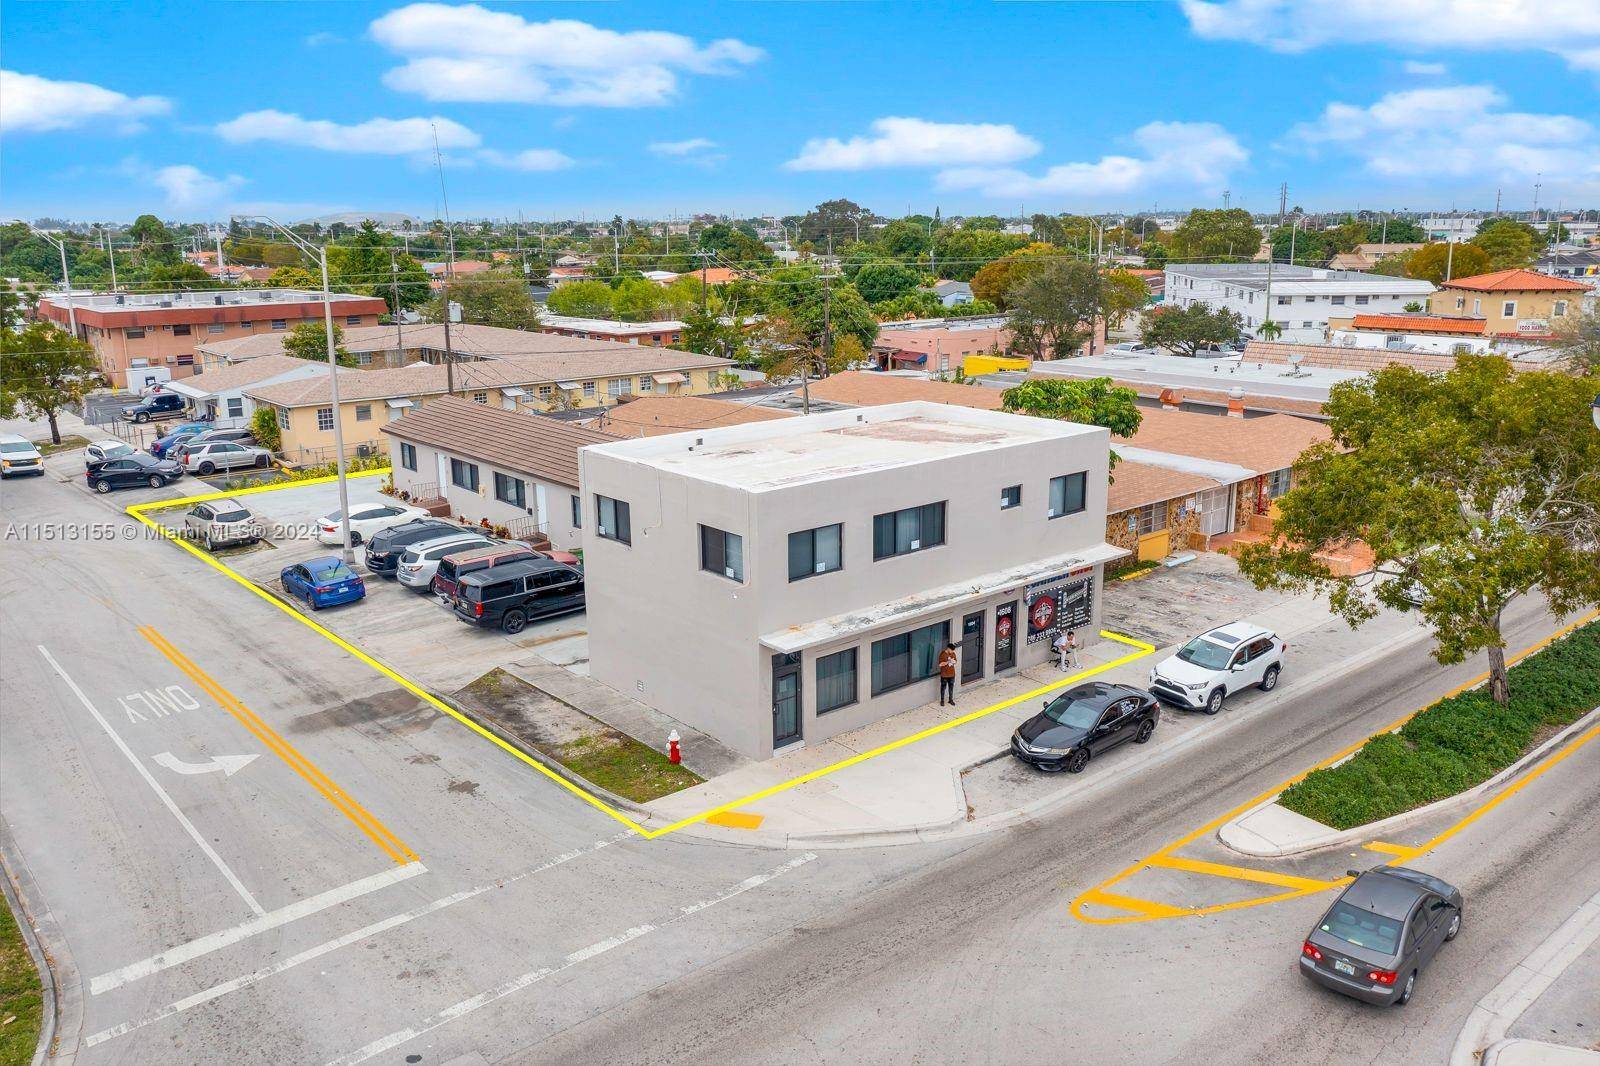 Mixed use property located in East Hialeah off of Palm Ave and 16th St.